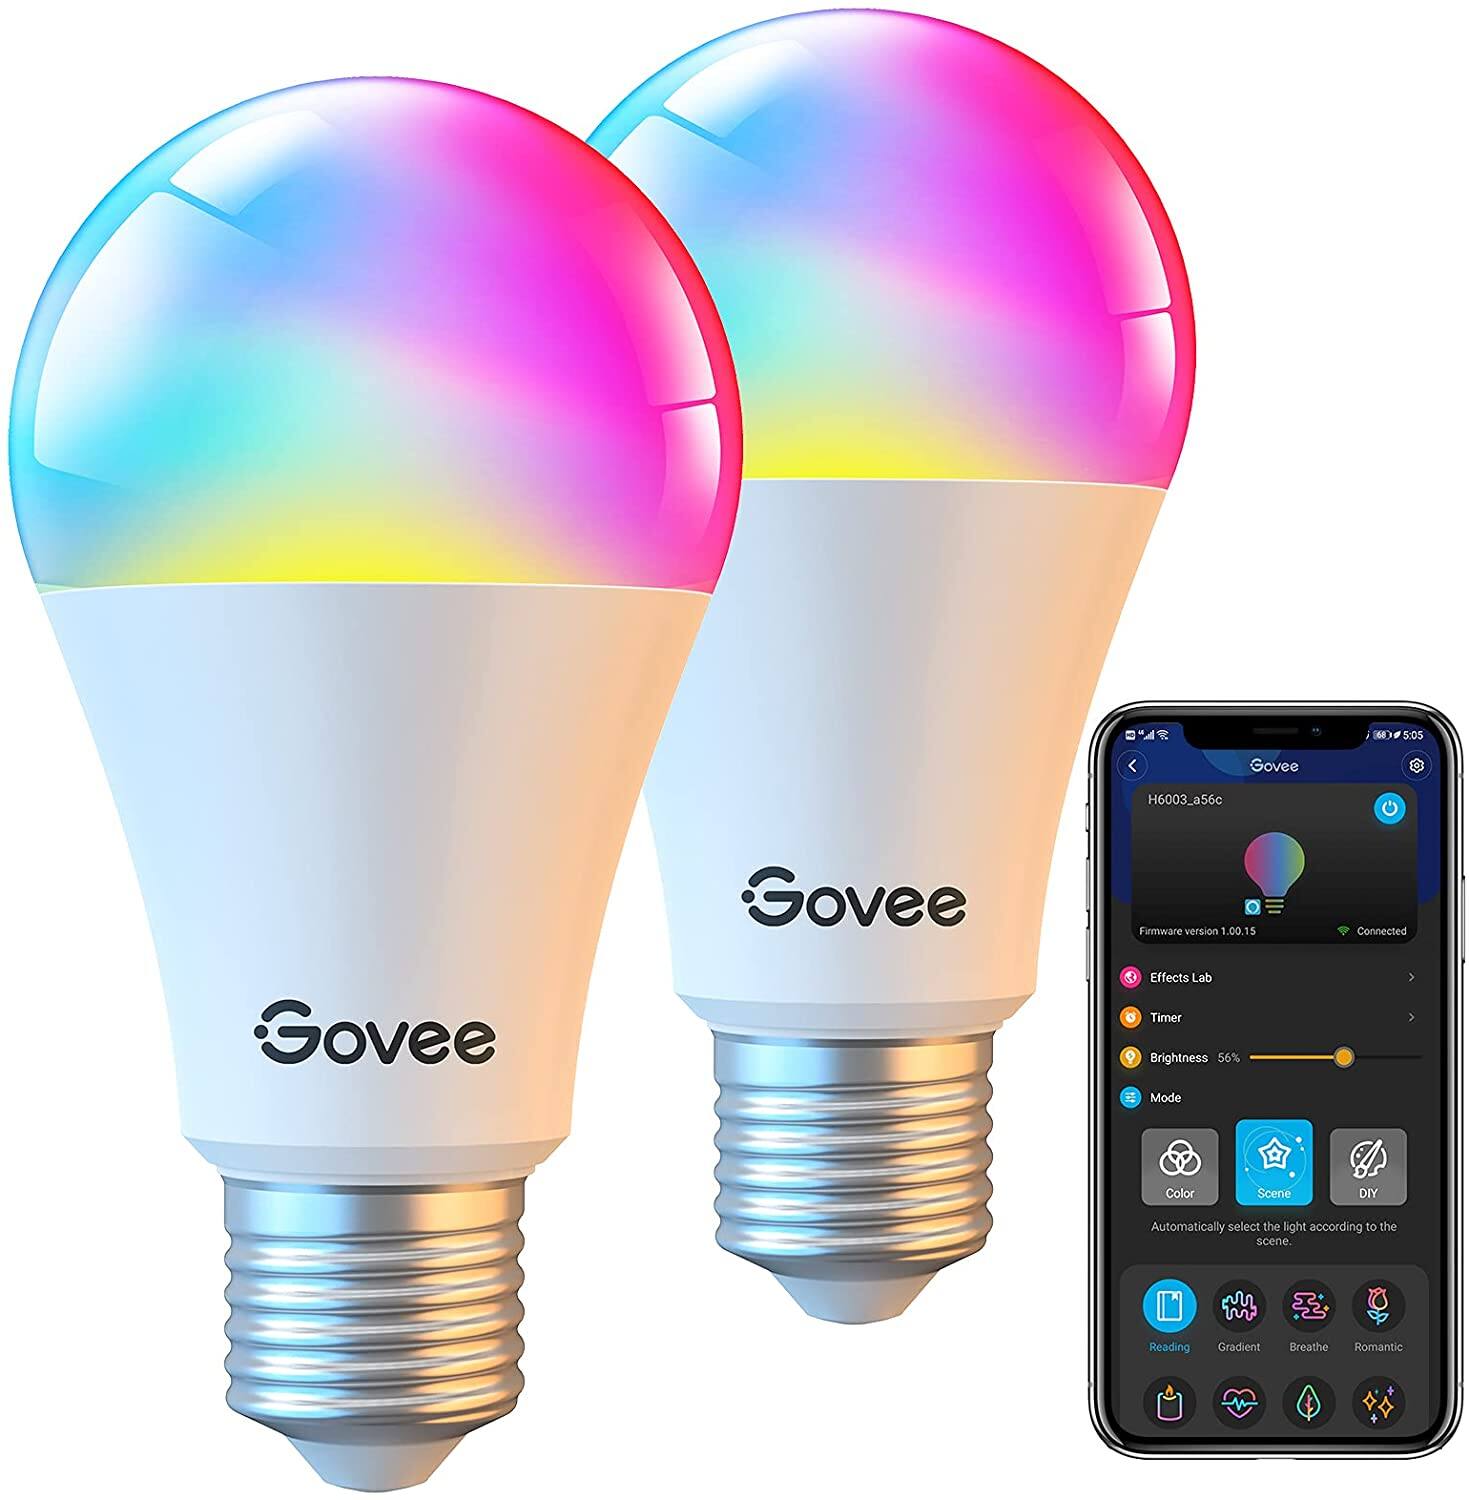 Govee 2 Pack WiFi RGB Color Changing Light Bulbs Work with Alexa & Google Assistant, 9W 60W Equivalent A19, Brightness Dimmable & Tunable: $15.59 + FS with Prime